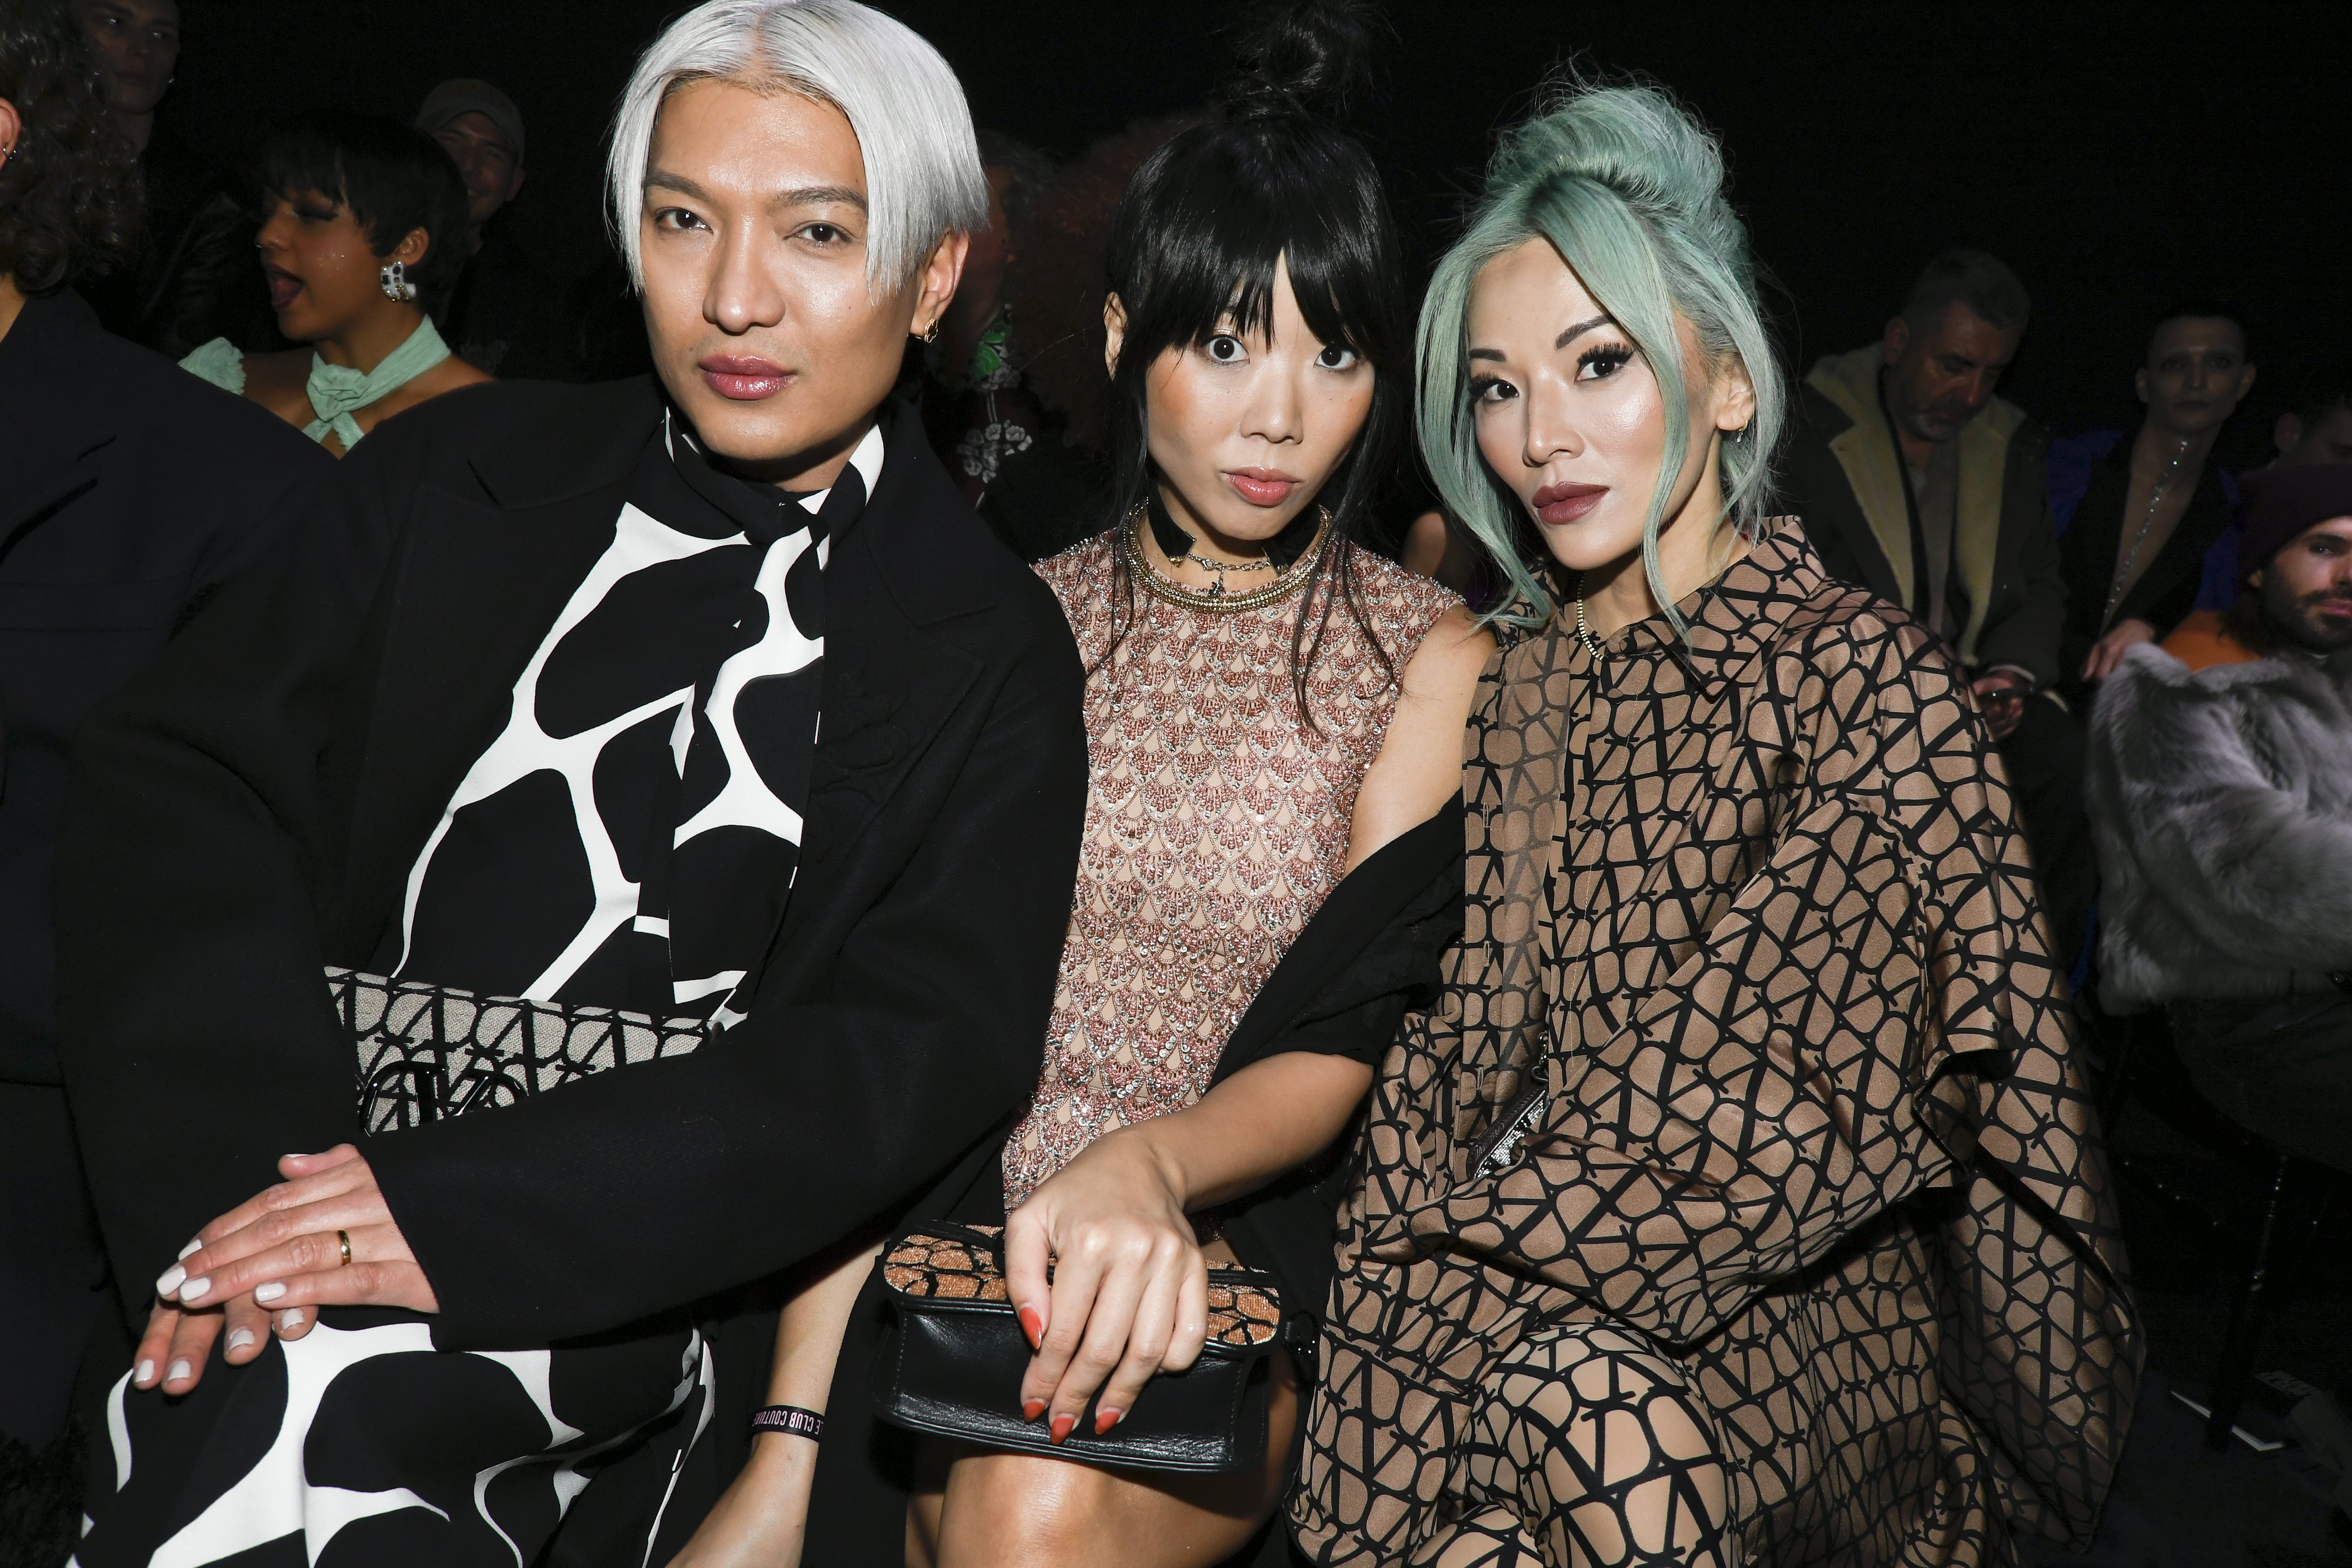 Meet the 5 'Slaysians' taking on the fashion world: from Bling